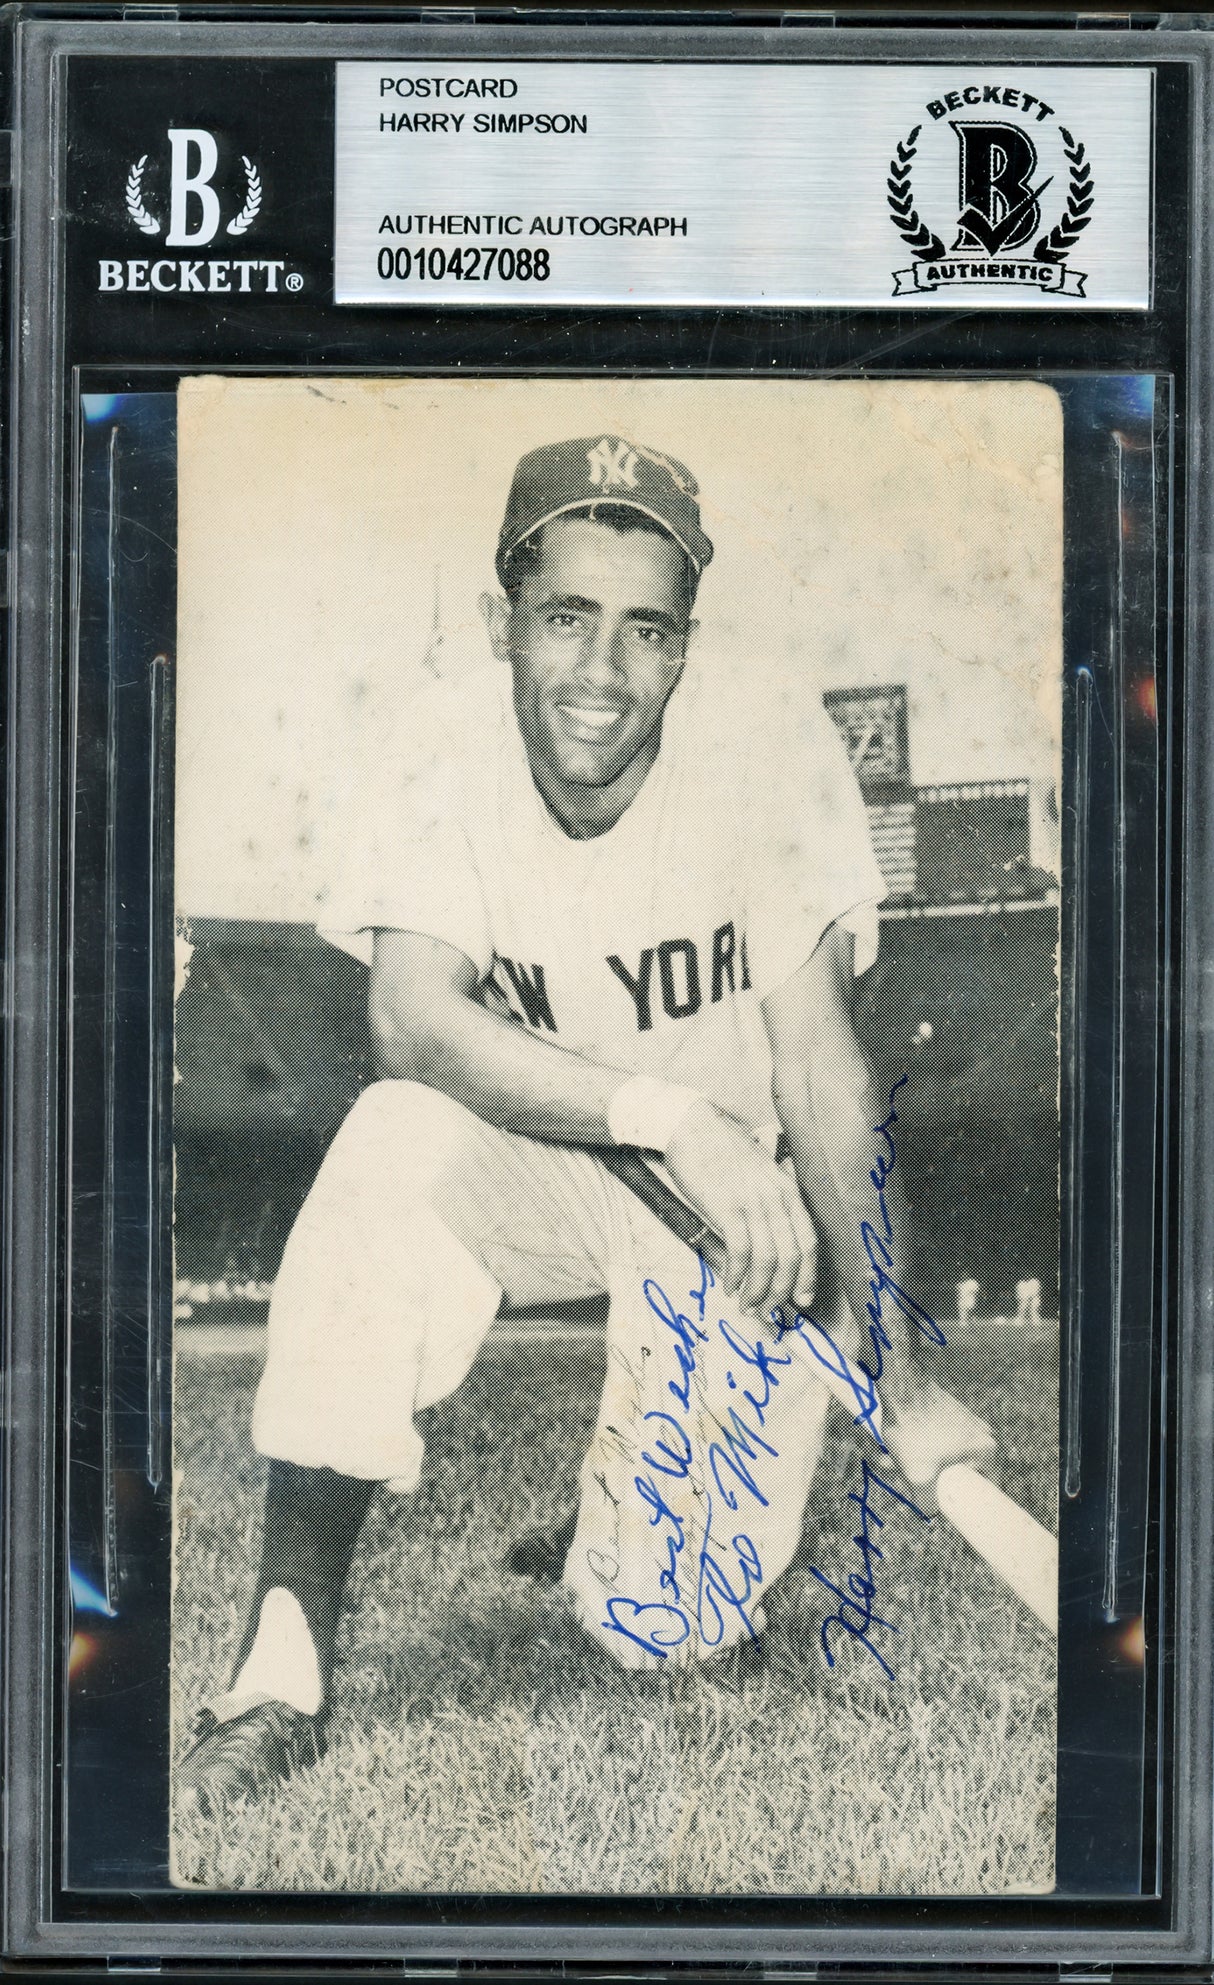 Harry Simpson Autographed 3x5.5 Postcard New York Yankees "Best Wishes To Mike" Beckett BAS #10427088